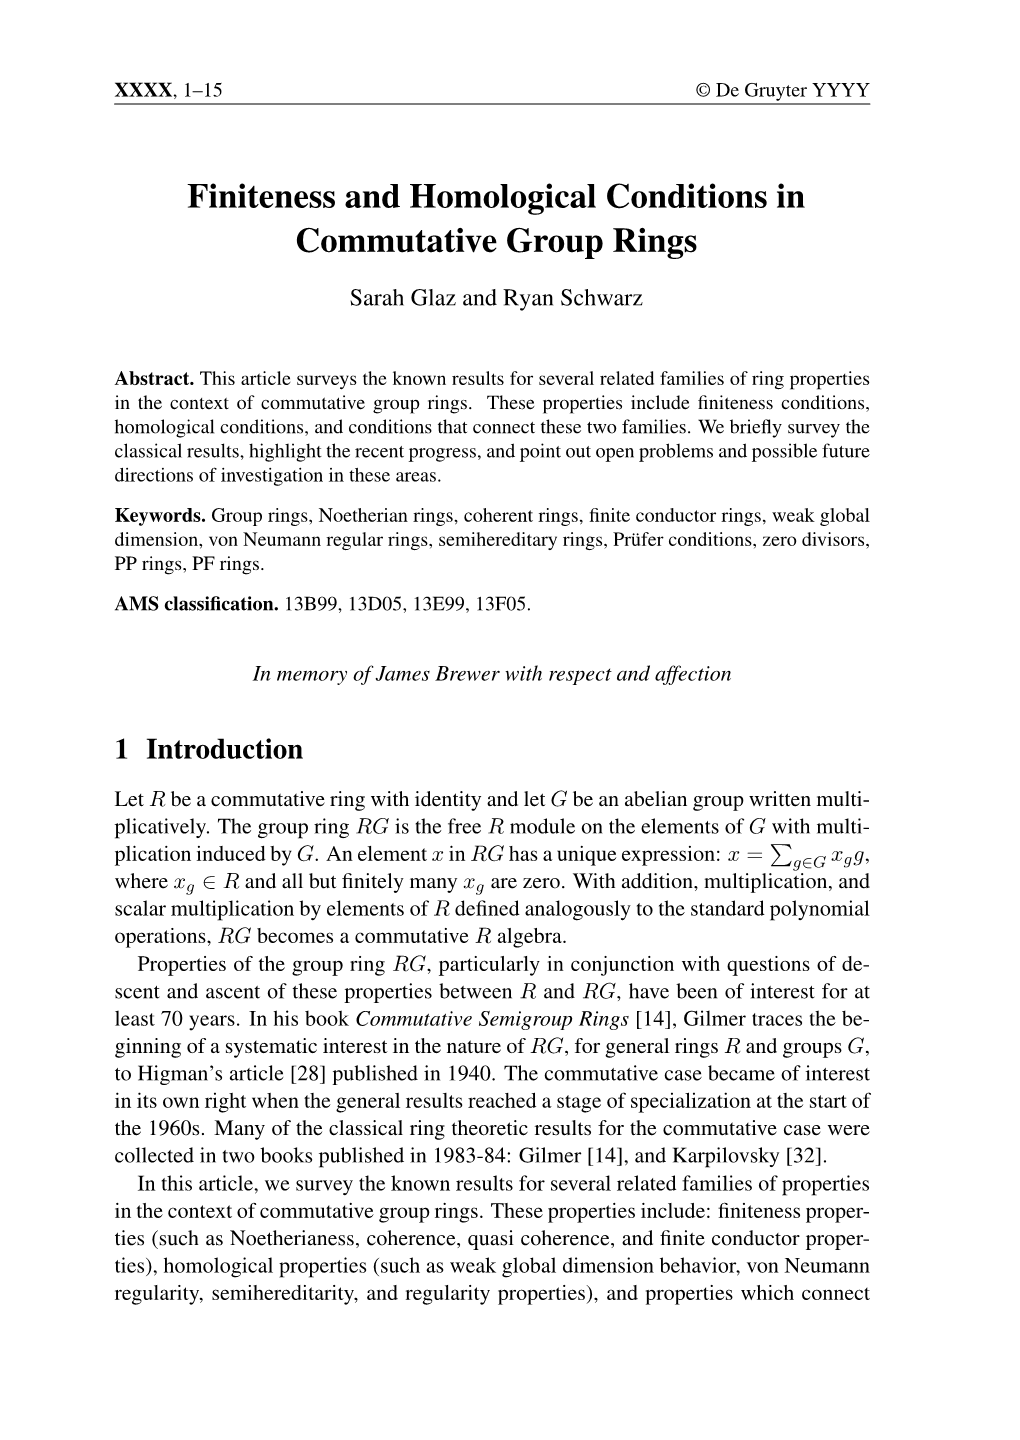 Finiteness and Homological Conditions in Commutative Group Rings